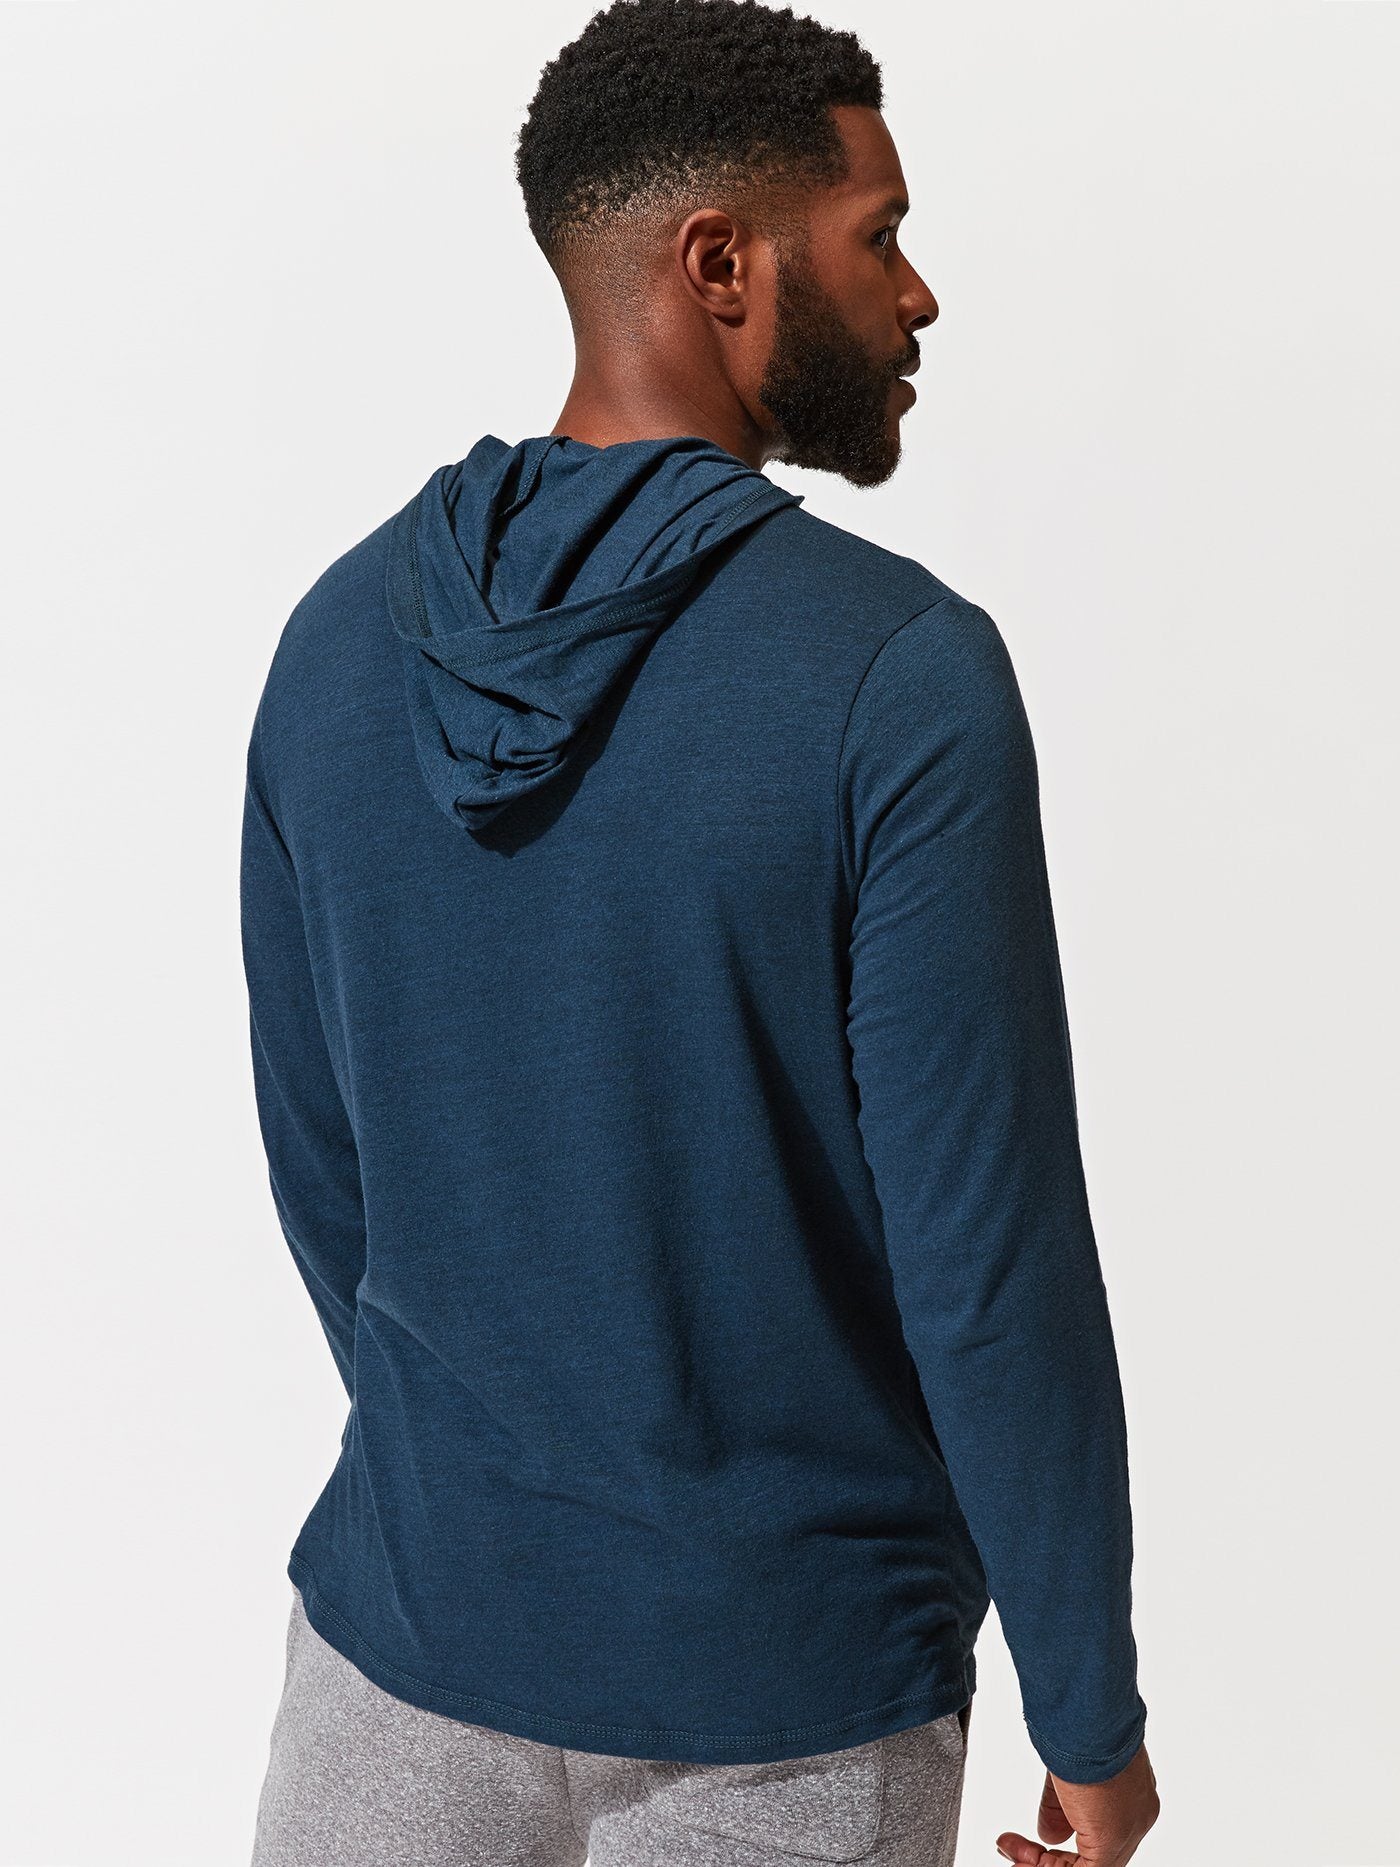 Long Sleeve Triblend Hoodie in Midnight – Threads 4 Thought